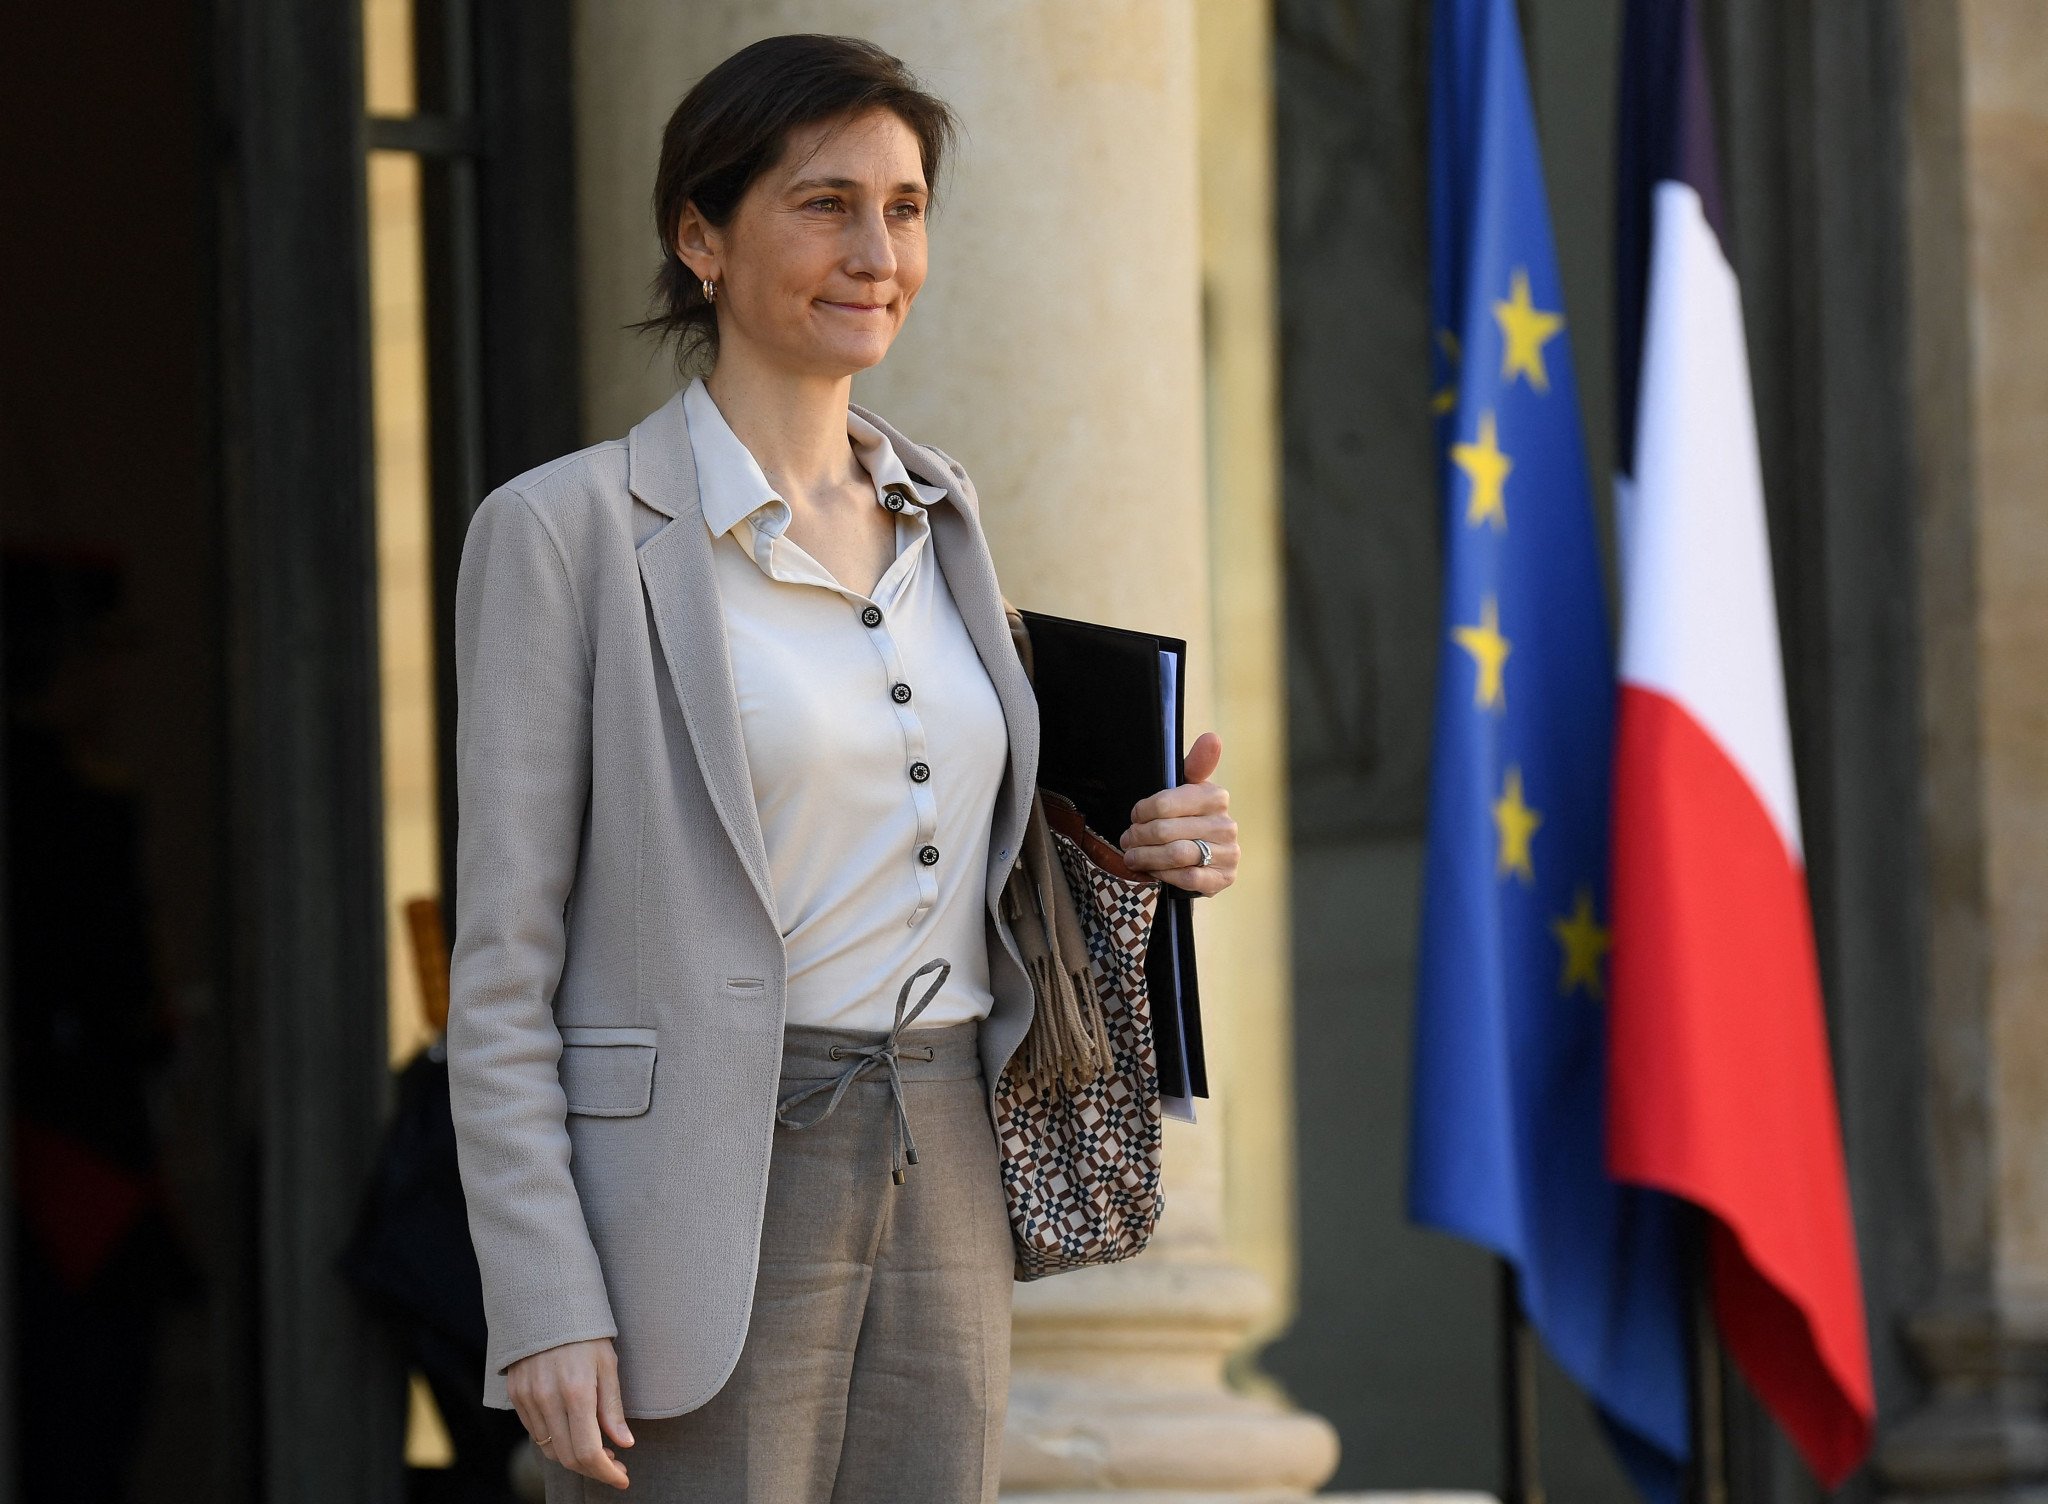 French Sports Minister Amélie Oudéa-Castéra has pledged to ensure more schools are able to access additional hours of sport per week ©Getty Images